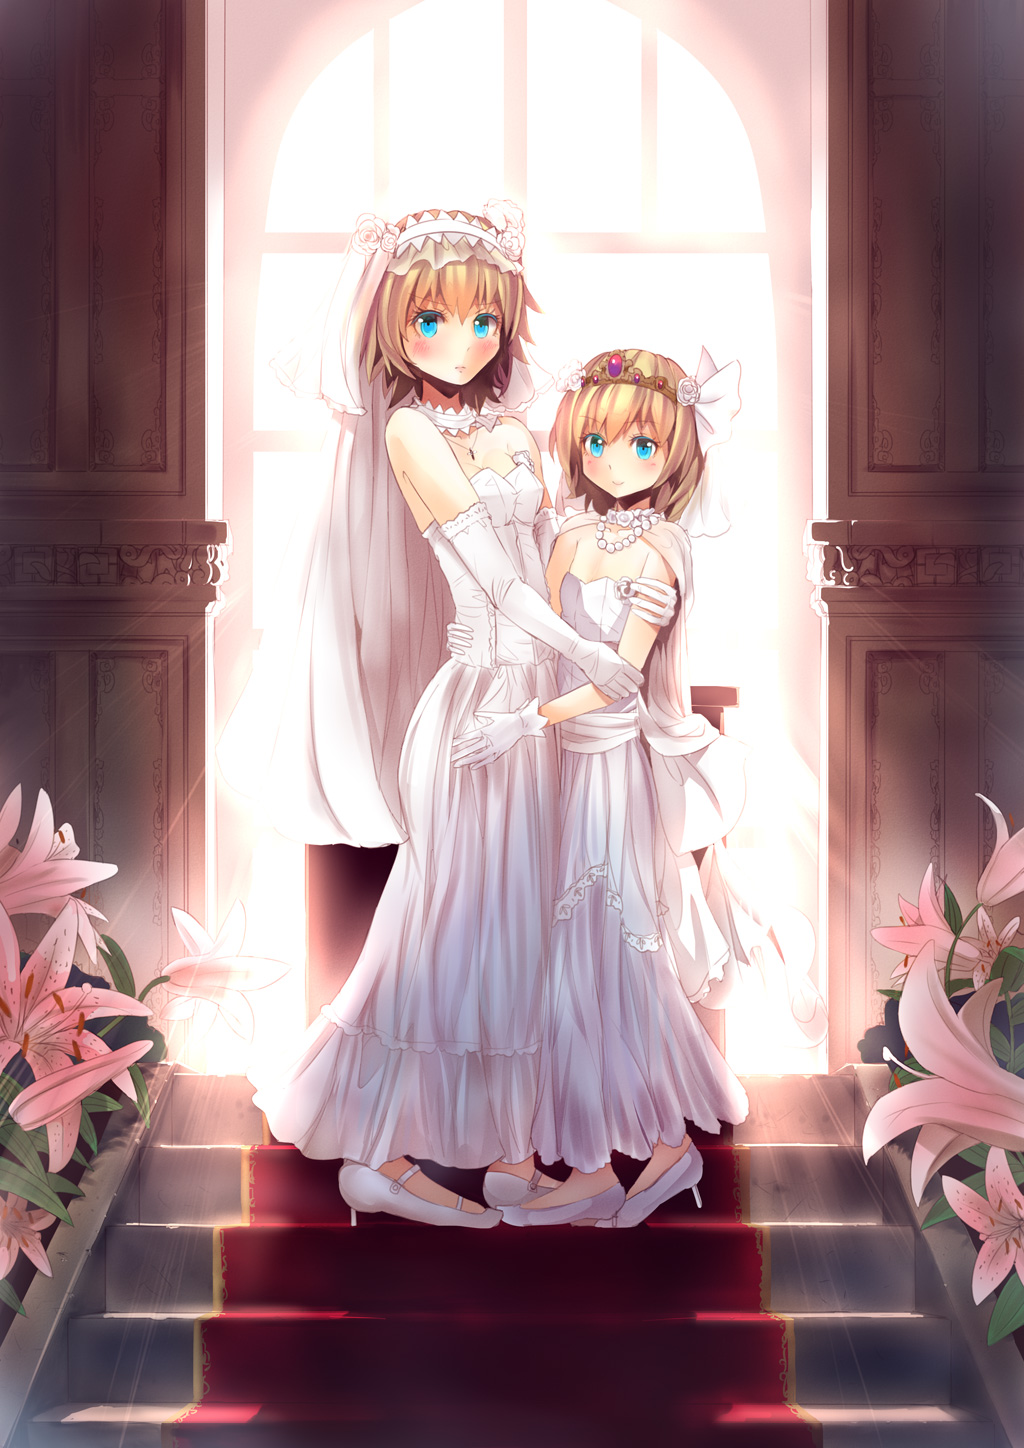 alice_margatroid alice_margatroid_(pc-98) alternate_costume backlighting bad_feet blonde_hair blue_eyes blush bridal_veil bride choker culter dress dual_persona elbow_gloves error flower gloves highres hug jewelry lily_(flower) looking_at_viewer multiple_girls necklace pendant smile stairs strapless strapless_dress tiara time_paradox touhou touhou_(pc-98) veil wedding_dress white_gloves window